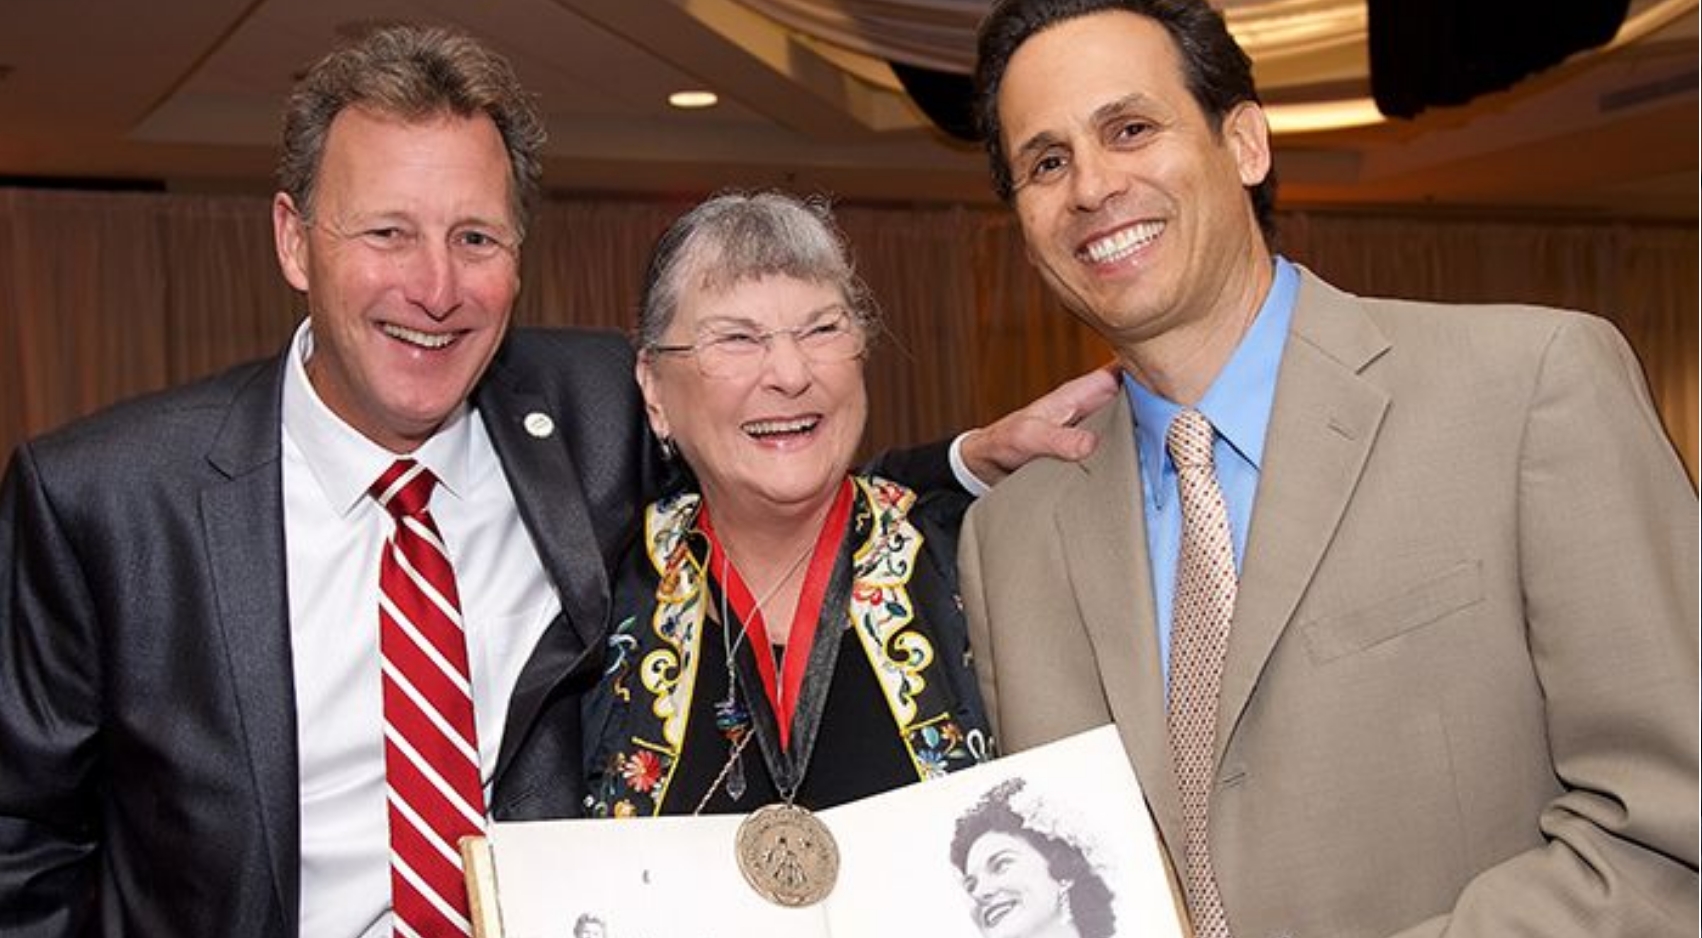 Jim Herrick (left) with SDSU's 1955 Homecoming Queen A. K. Jones ('56) and Anthropology Professor Seth Mallios (right) during the university's 125th anniversary celebration.